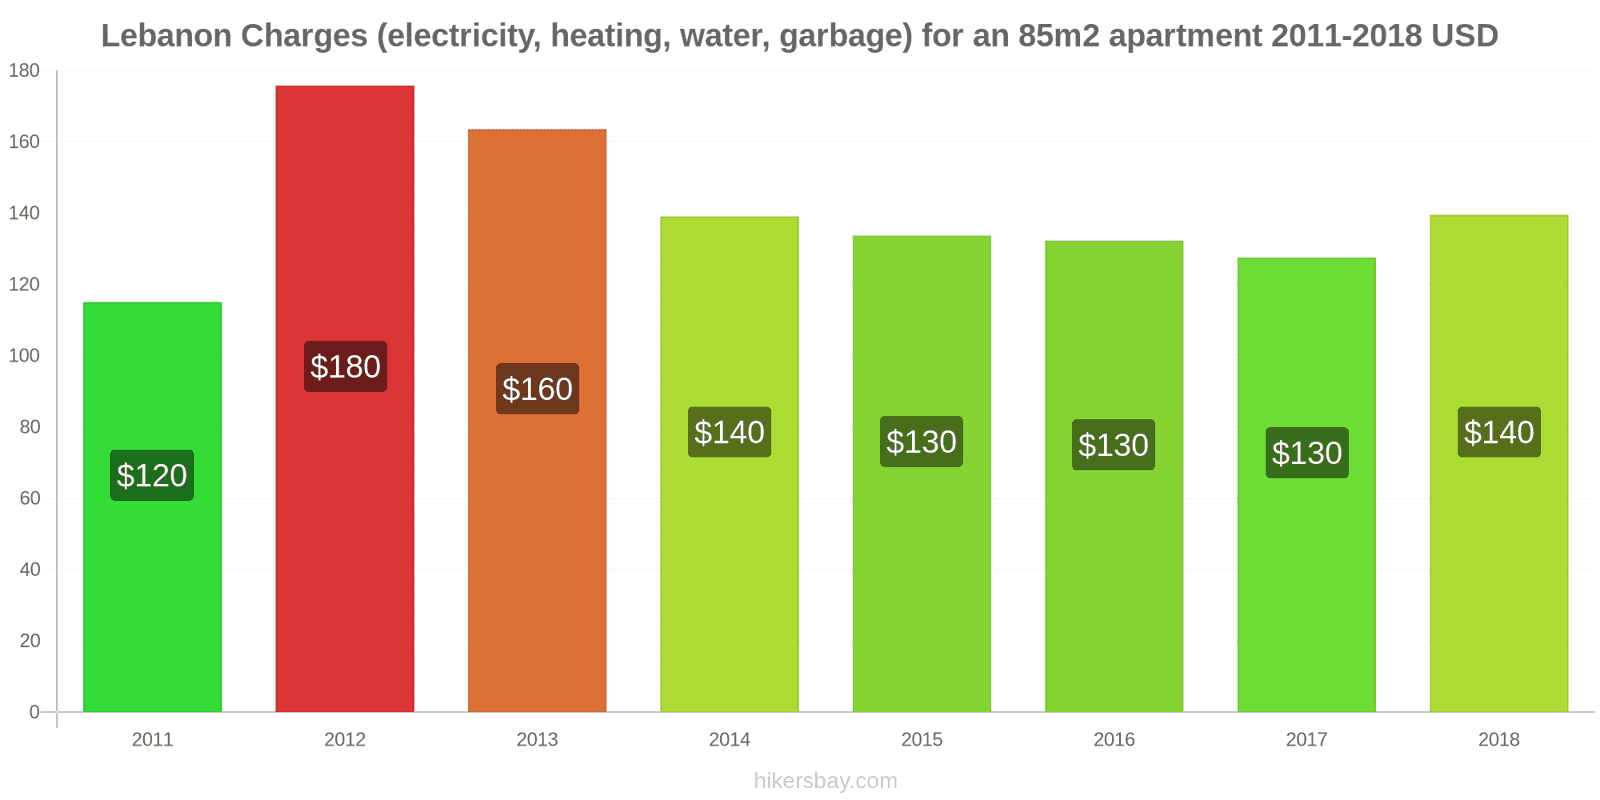 Lebanon price changes Utilities (electricity, heating, water, garbage) for an 85m2 apartment hikersbay.com